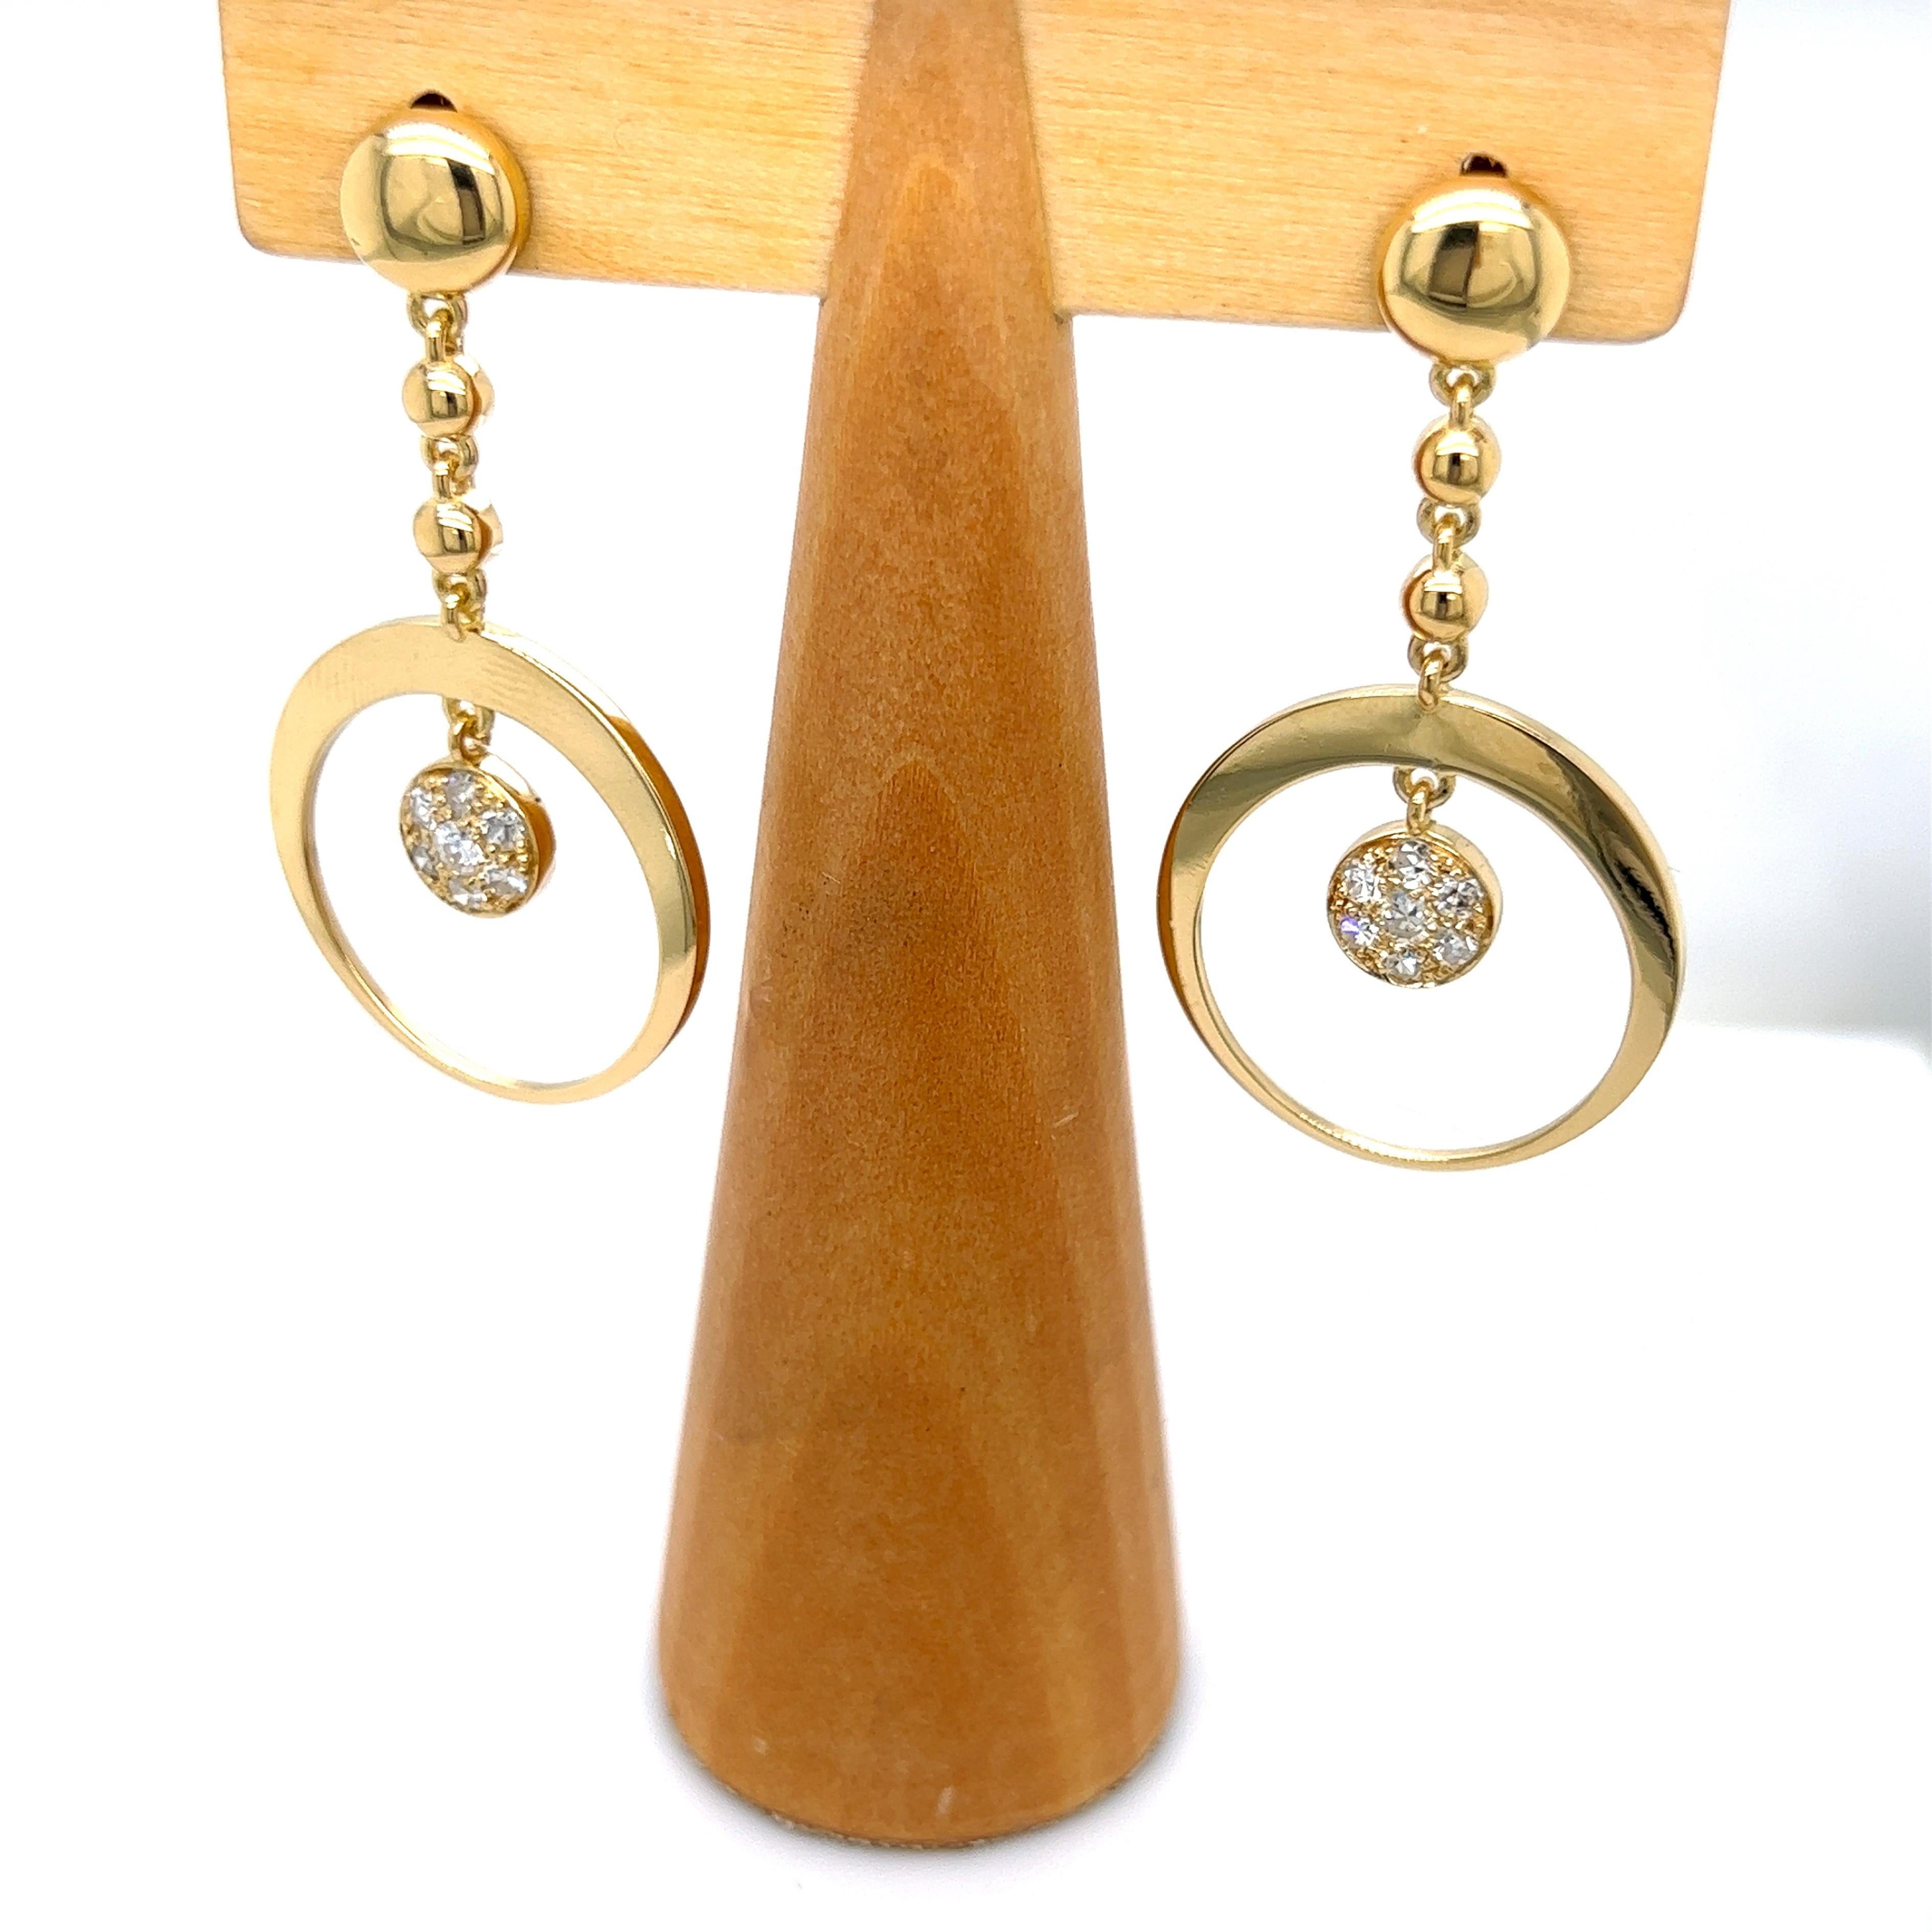 Chic yet timeless, 0.59Kt Top Quality White Diamond 18K Yellow Gold hand crafted Setting dangle Earrings.
Brimming with utter grace and sophistication, these earrings can be worn during the day with any attire and give your evening outfits a touch